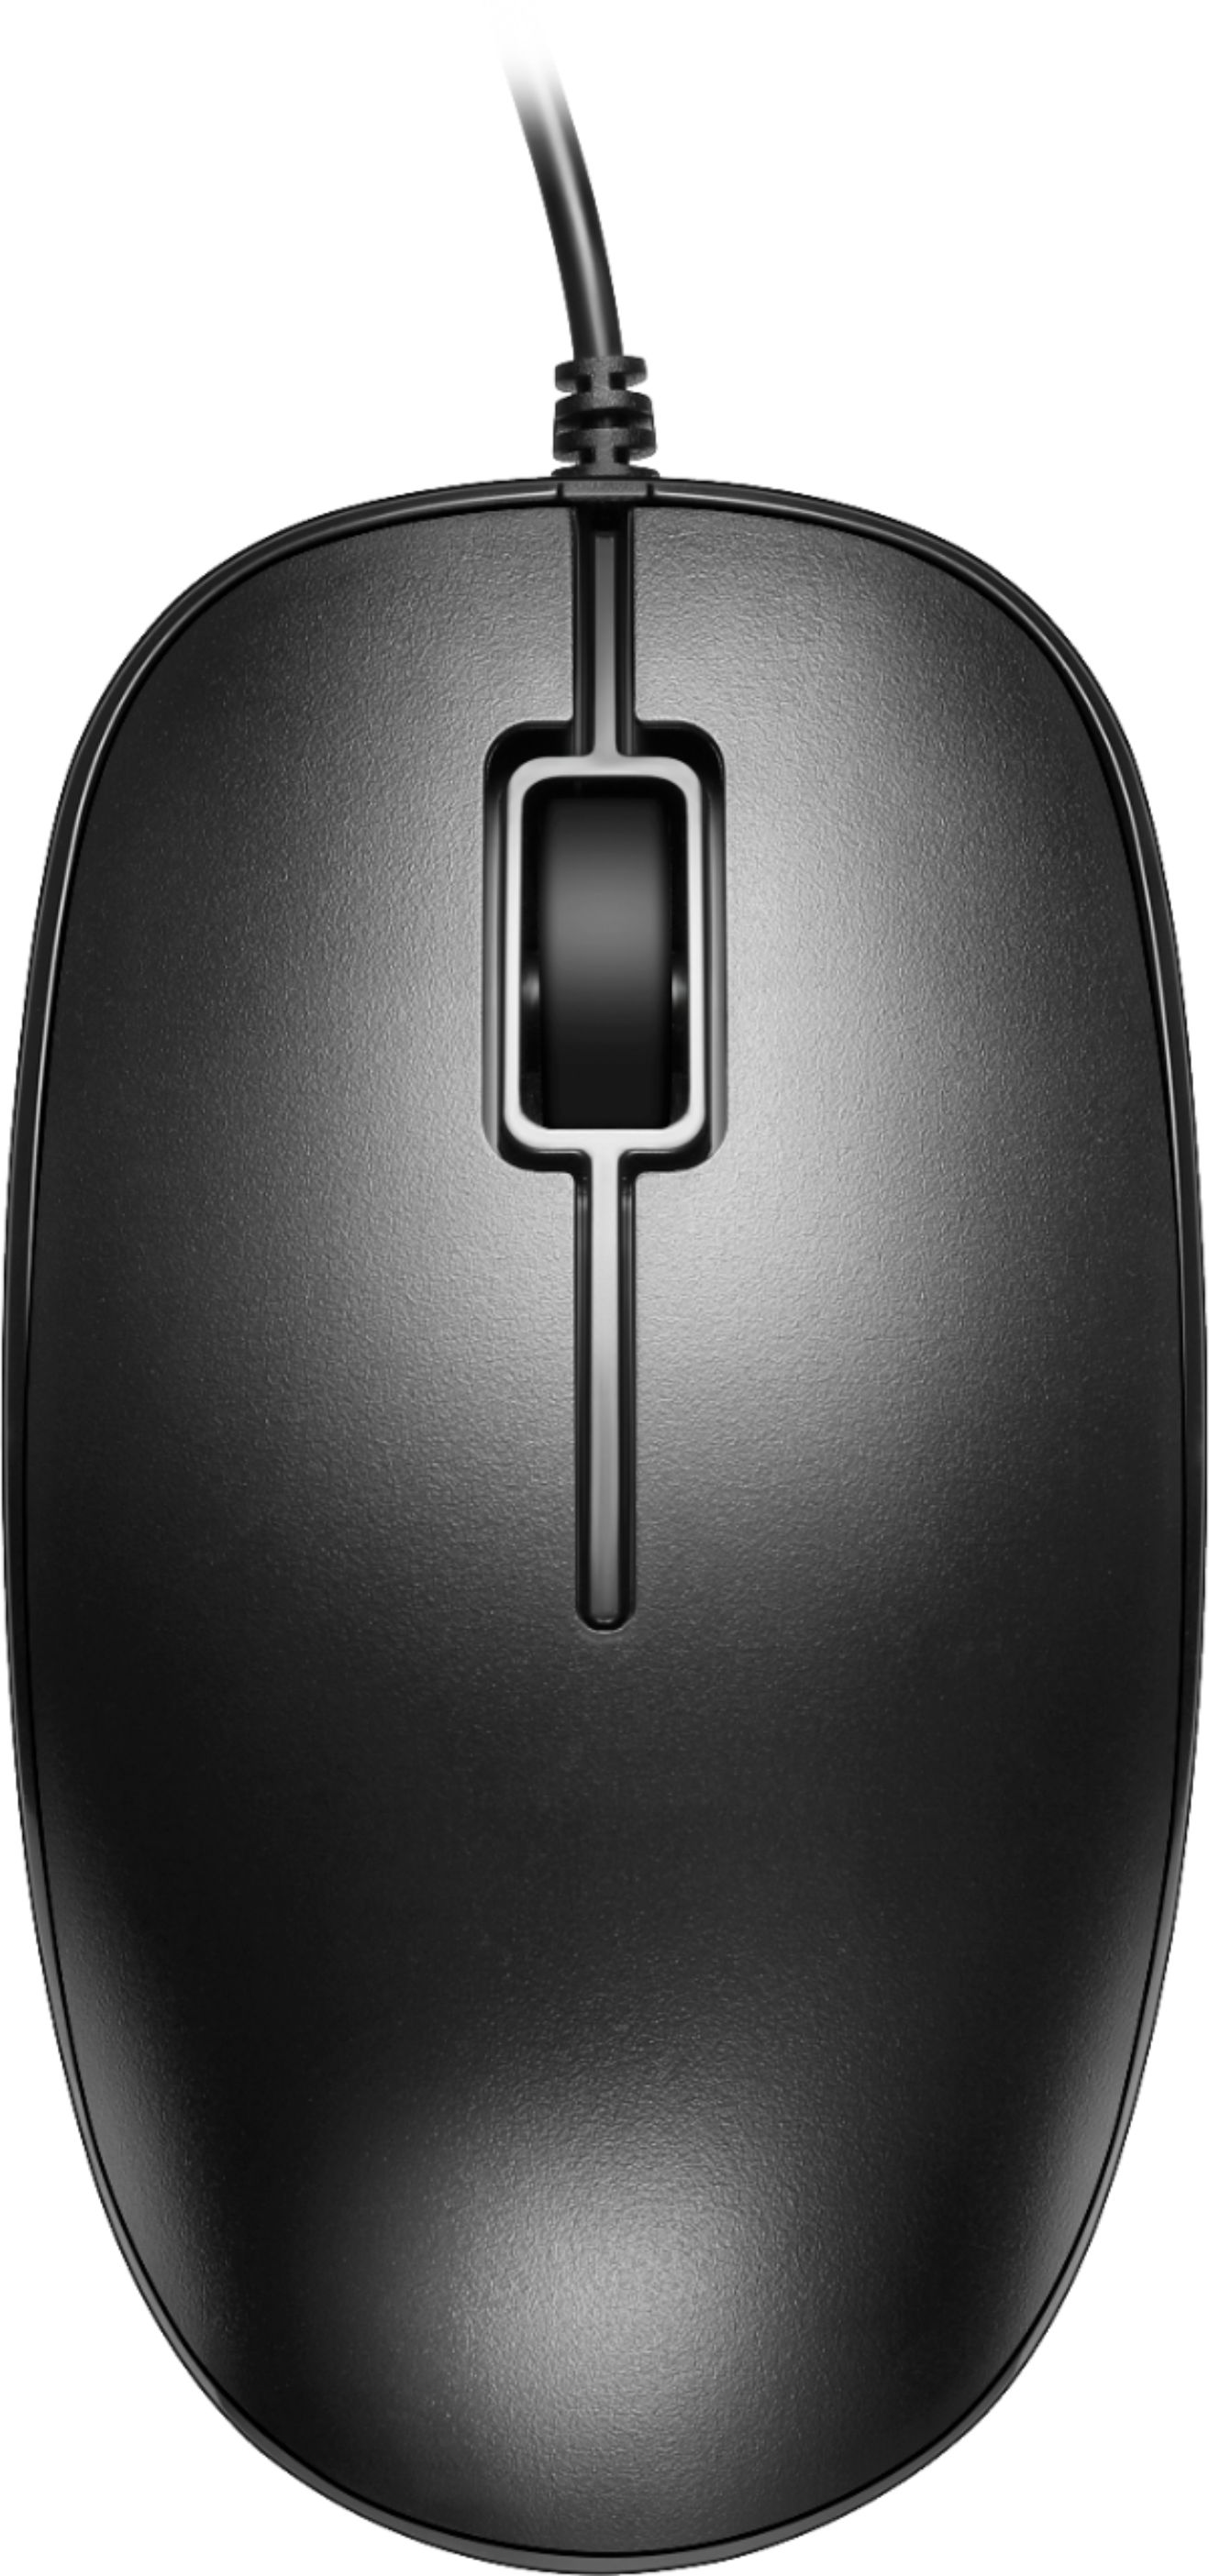 Best Buy essentials™ USB Wired Optical Standard Ambidextrous Mouse Black  BE-PMWD3B - Best Buy